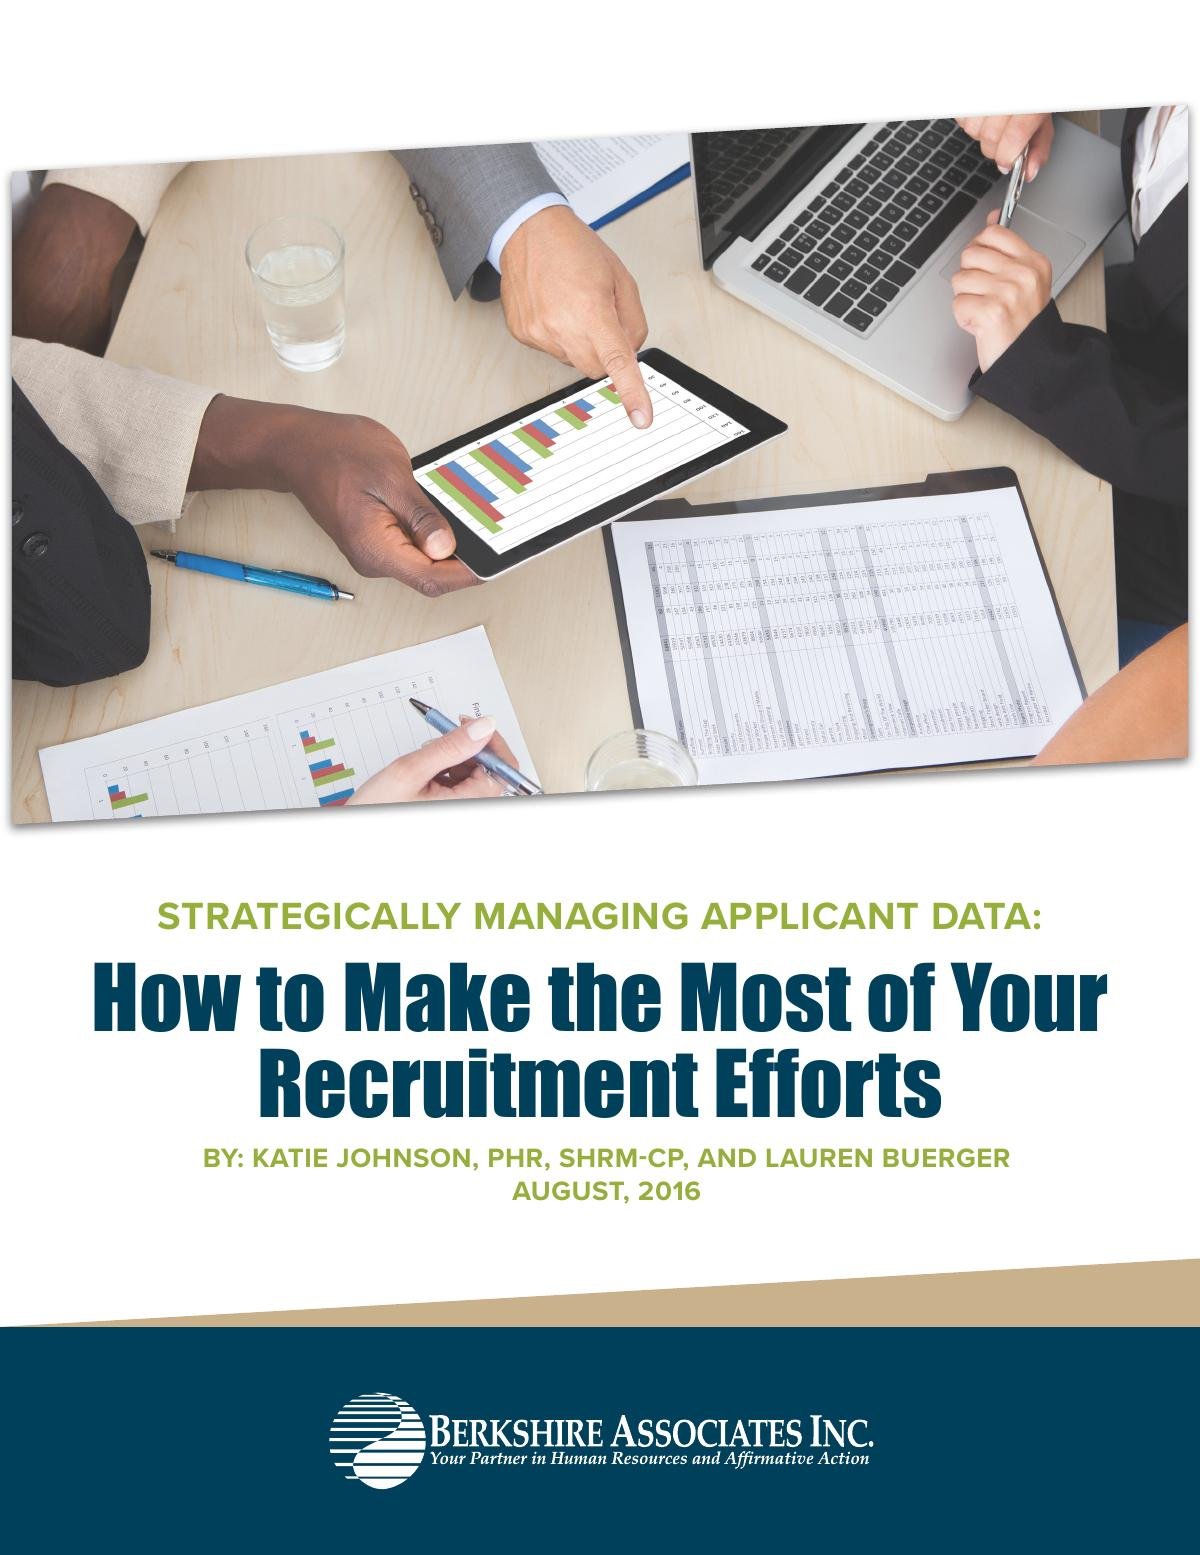 Strategically Managing Applicant Data: How to Make the Most of Your Recruitment Efforts